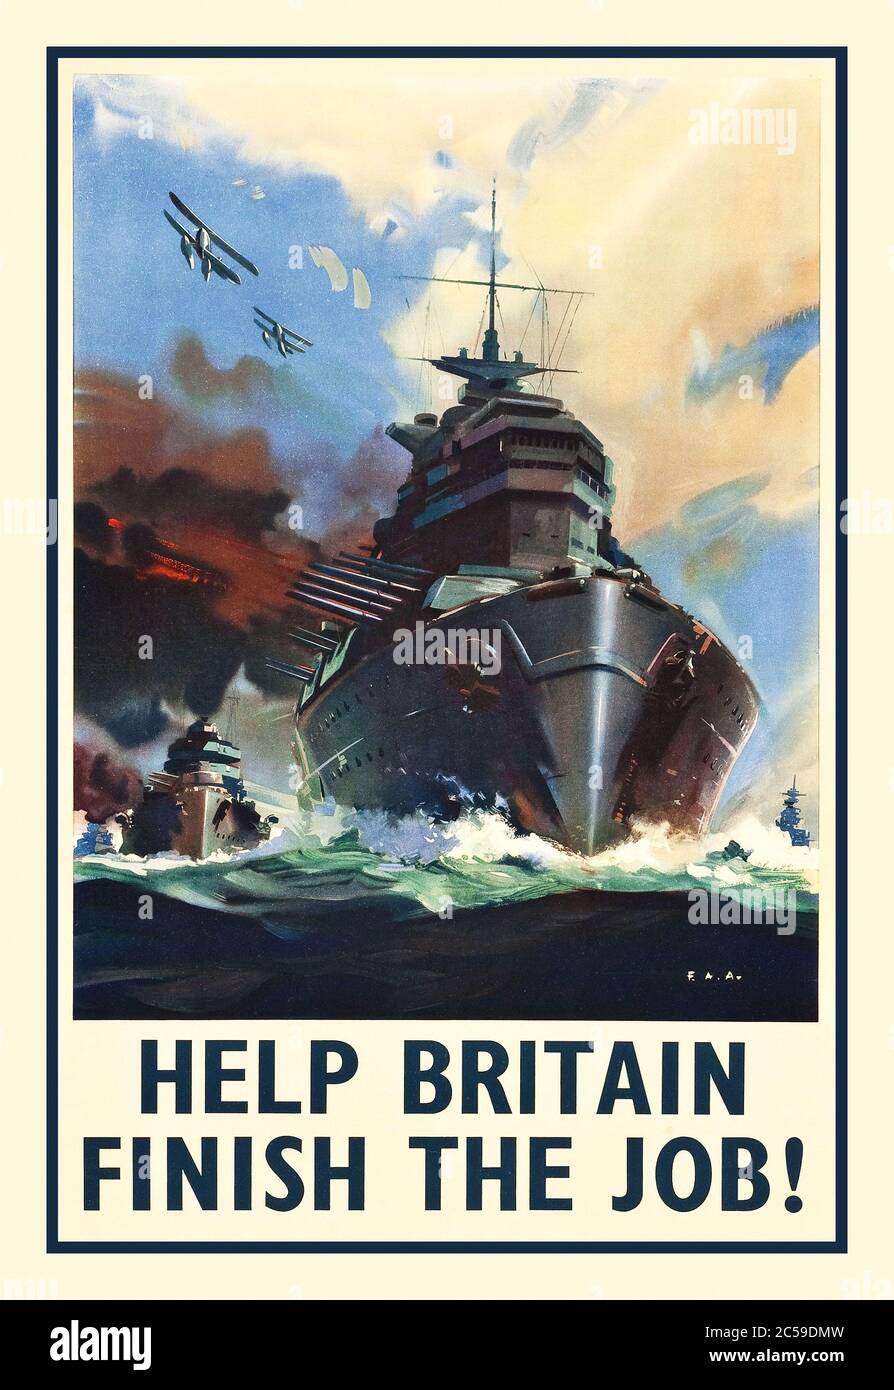 World War II Propaganda Recruitment Recruiting (1940s). British Naval Poster 'Help Britain Finish the Job.' Battleships part the seas as escort aircraft soars above on this WWII WW2 poster, meant to inspire potential recruits to join the fight and 'Help Britain Finish the War.' Stock Photo